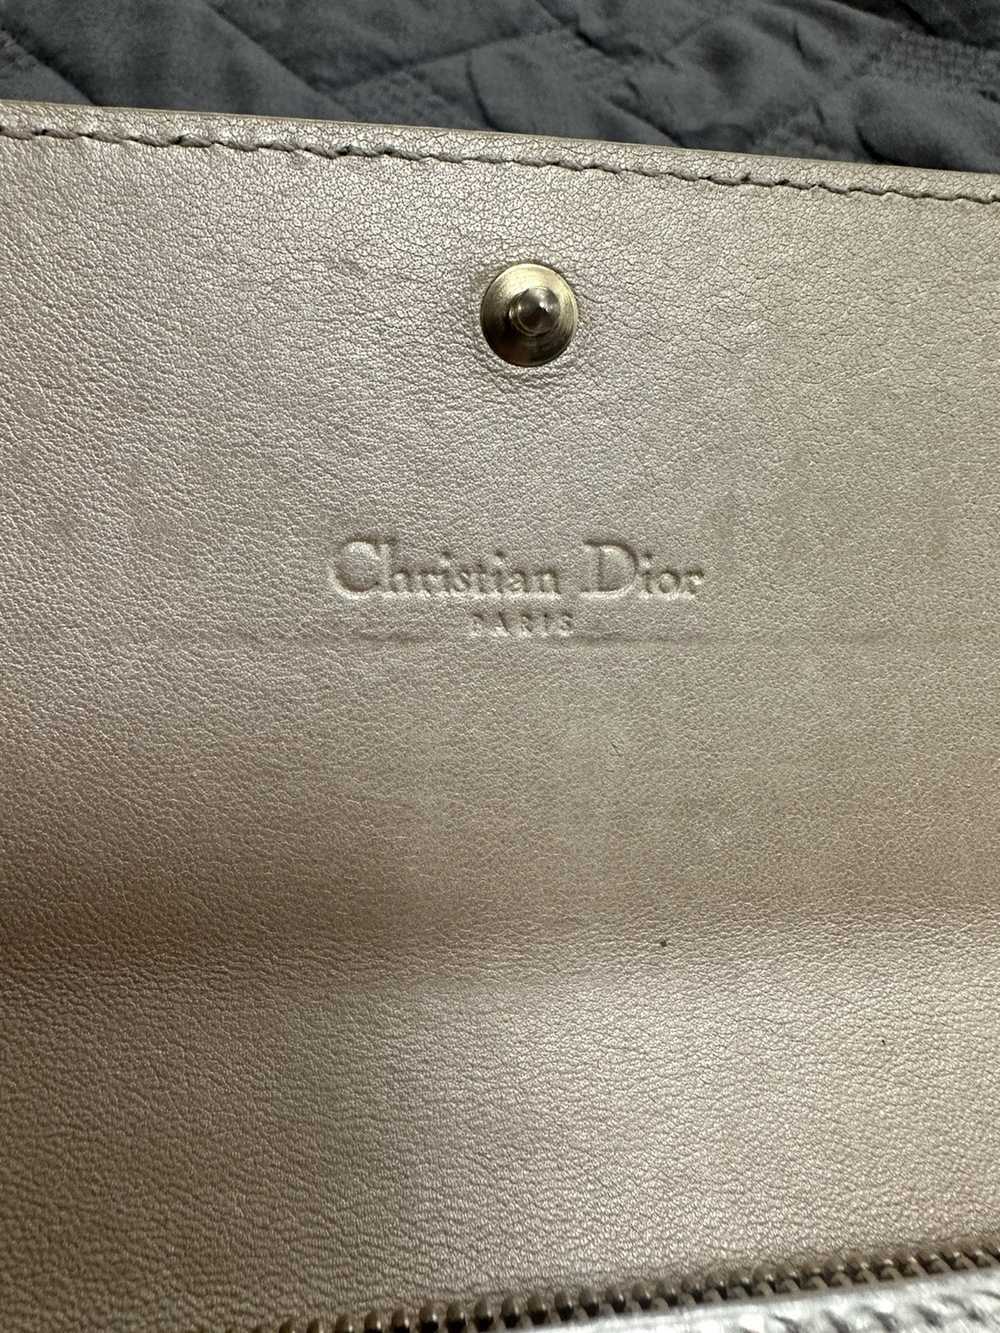 Dior Dior Rare Embossed Patent leather long wallet - image 5